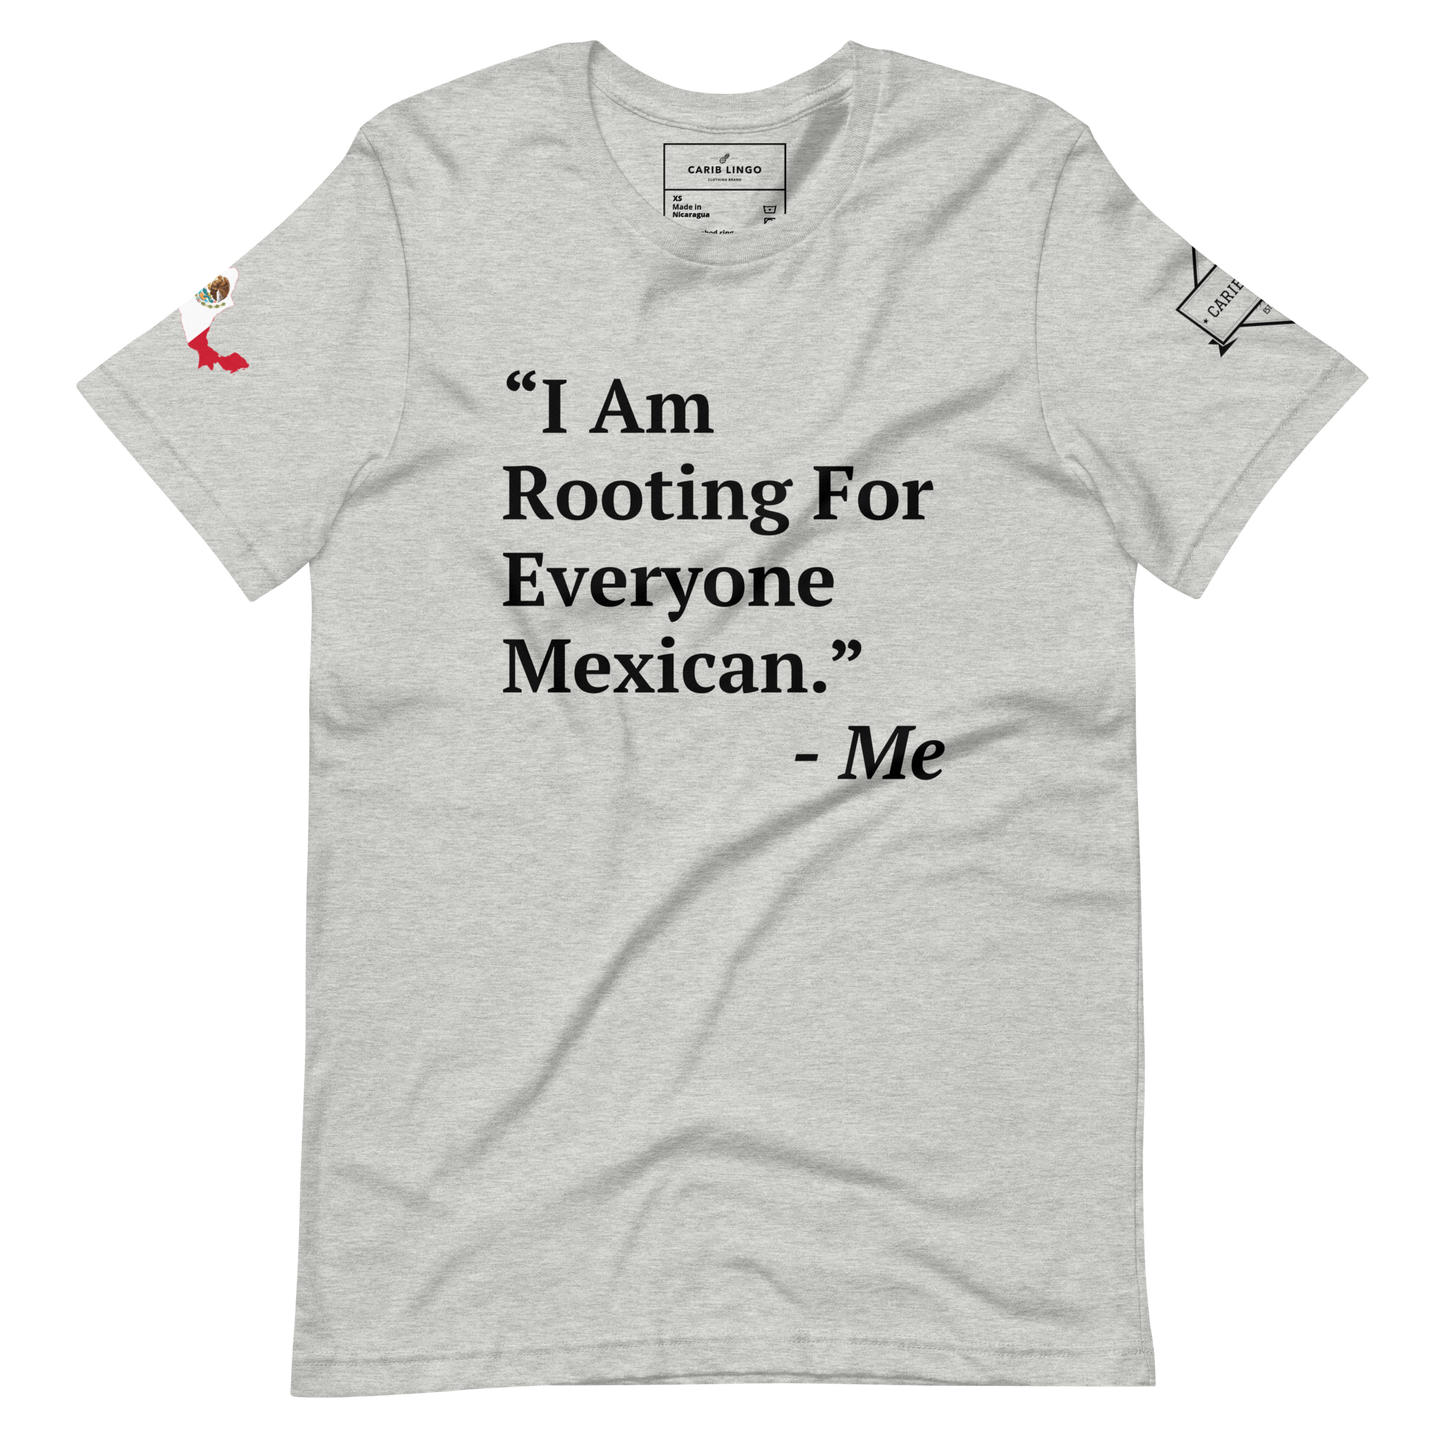 I Am Rooting: Mexico Unisex t-shirt